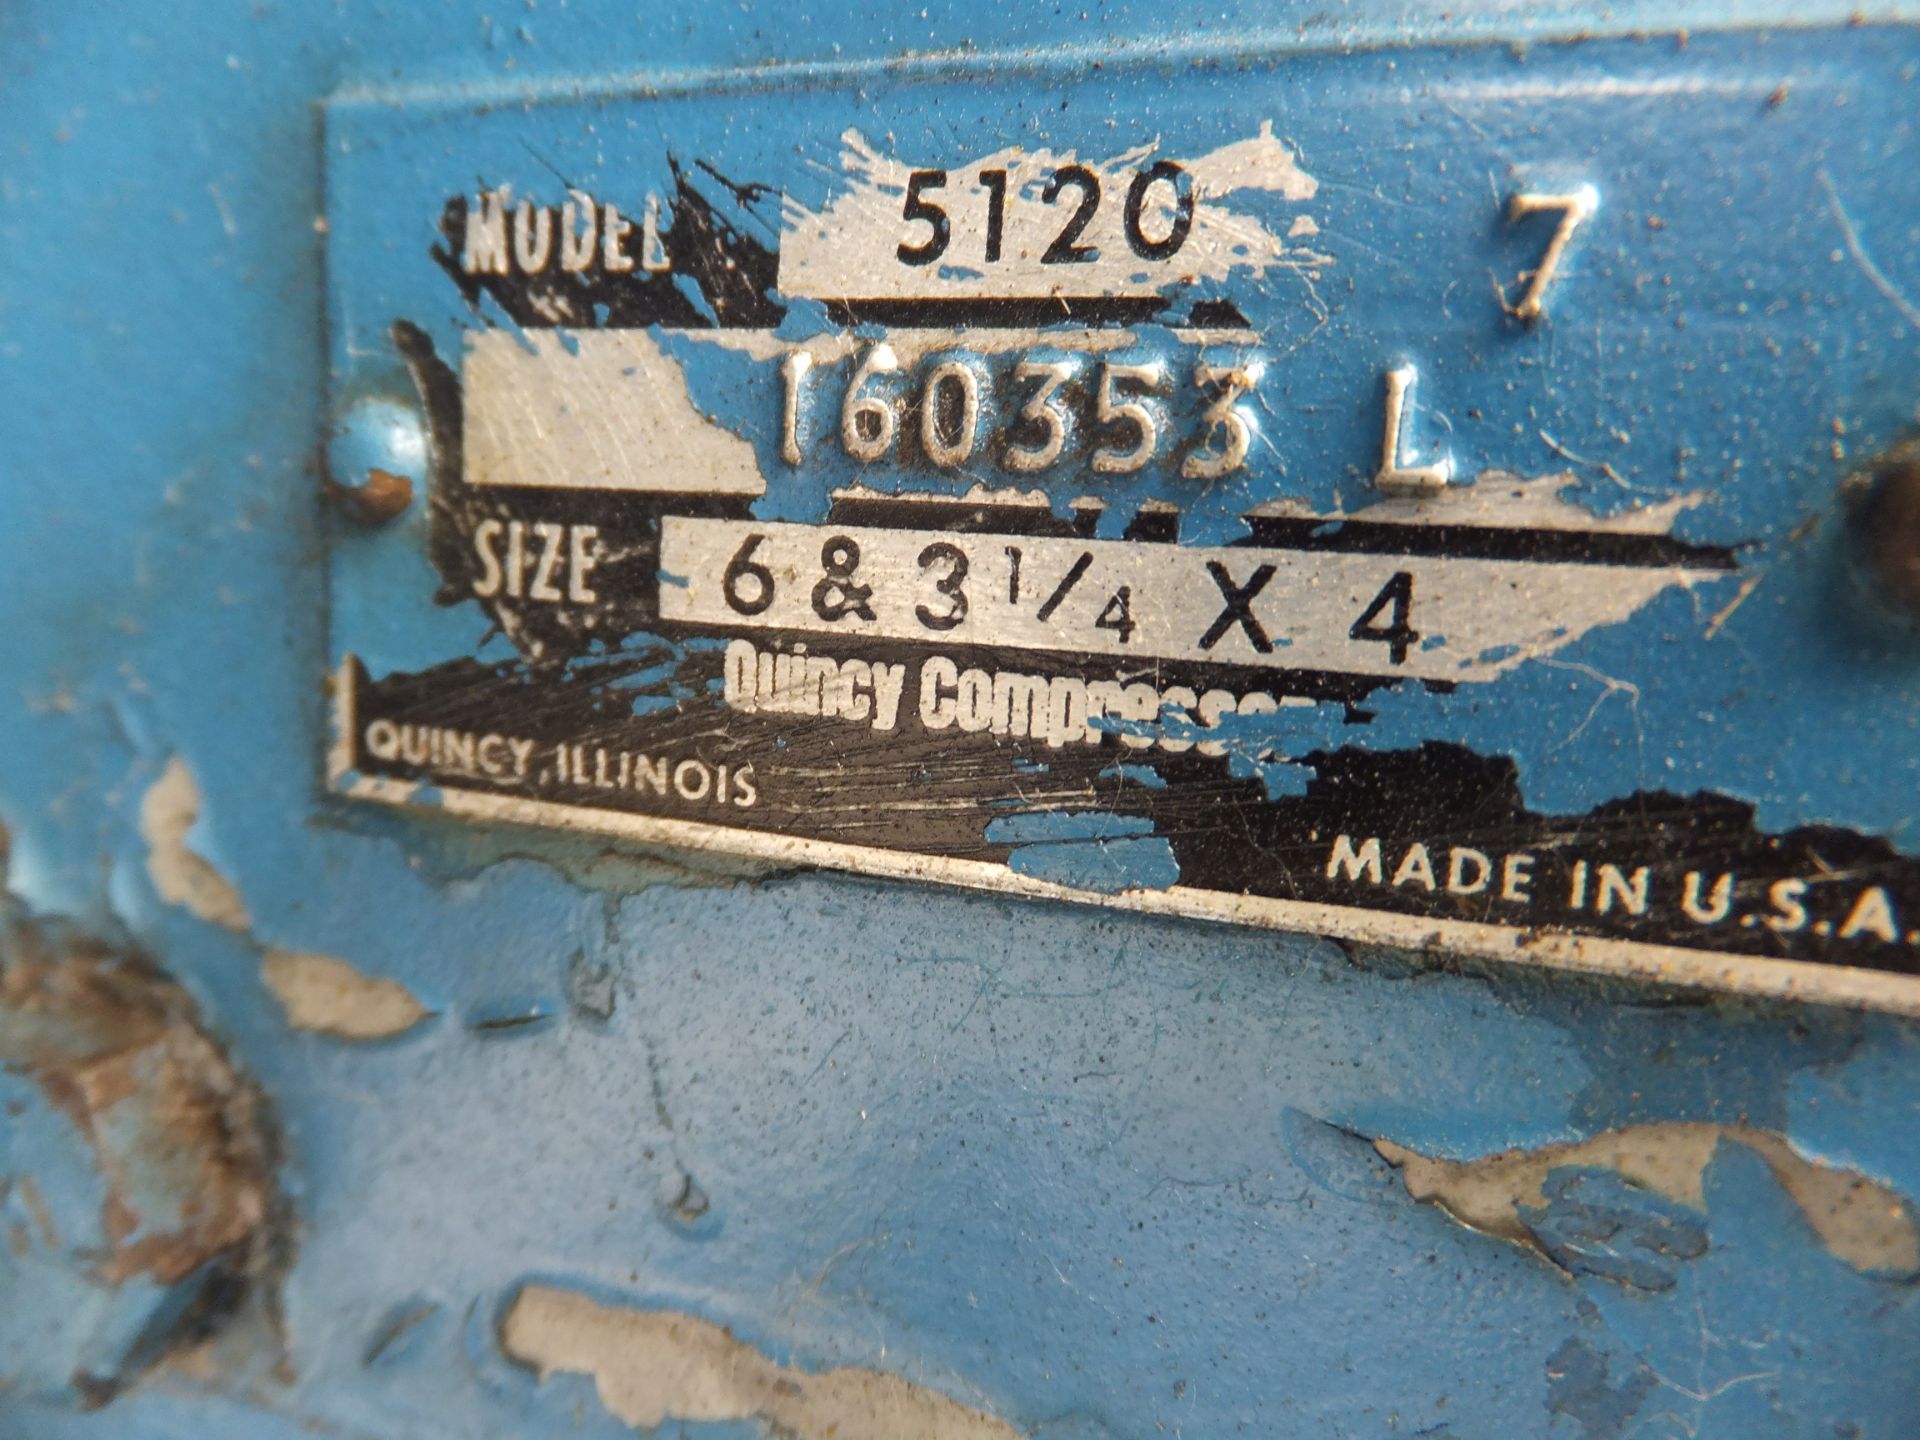 Quincy 25 Hp Reciprocating Air Compressor, Model 5120, S/N 160353 L, Size 6 & 3-1/4 x 4, Lincoln - Image 5 of 10